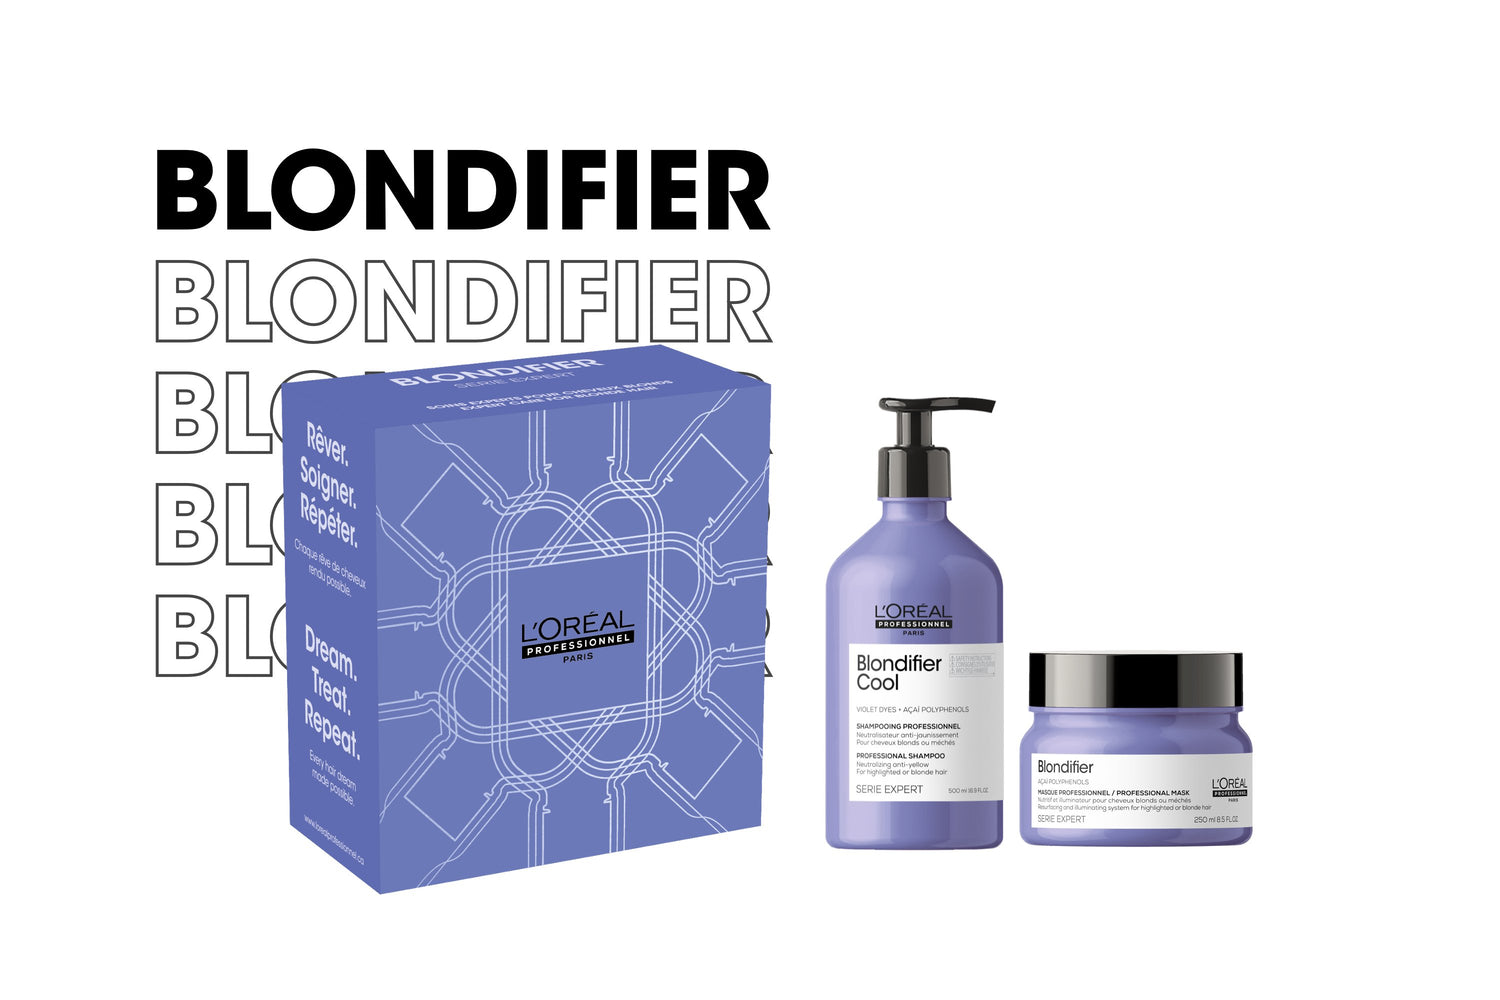 Blondifier Holiday kit for blond hair